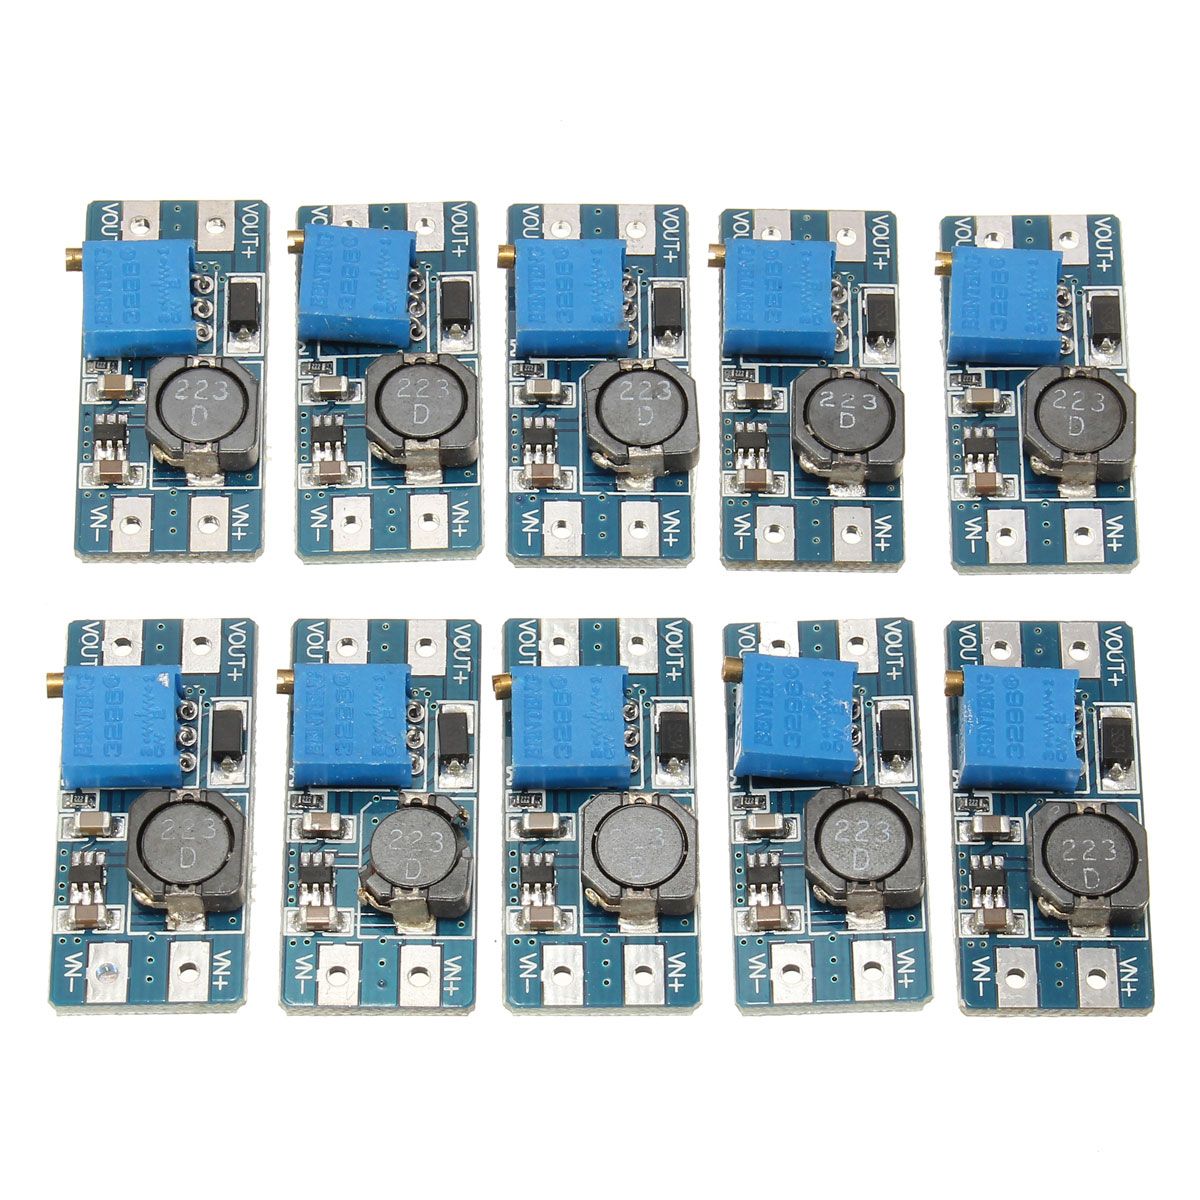 50-Pcs-Step-Up-Power-Supply-Module-2A-2V-24V-DC-DC-Booster-Power-Module-1355704